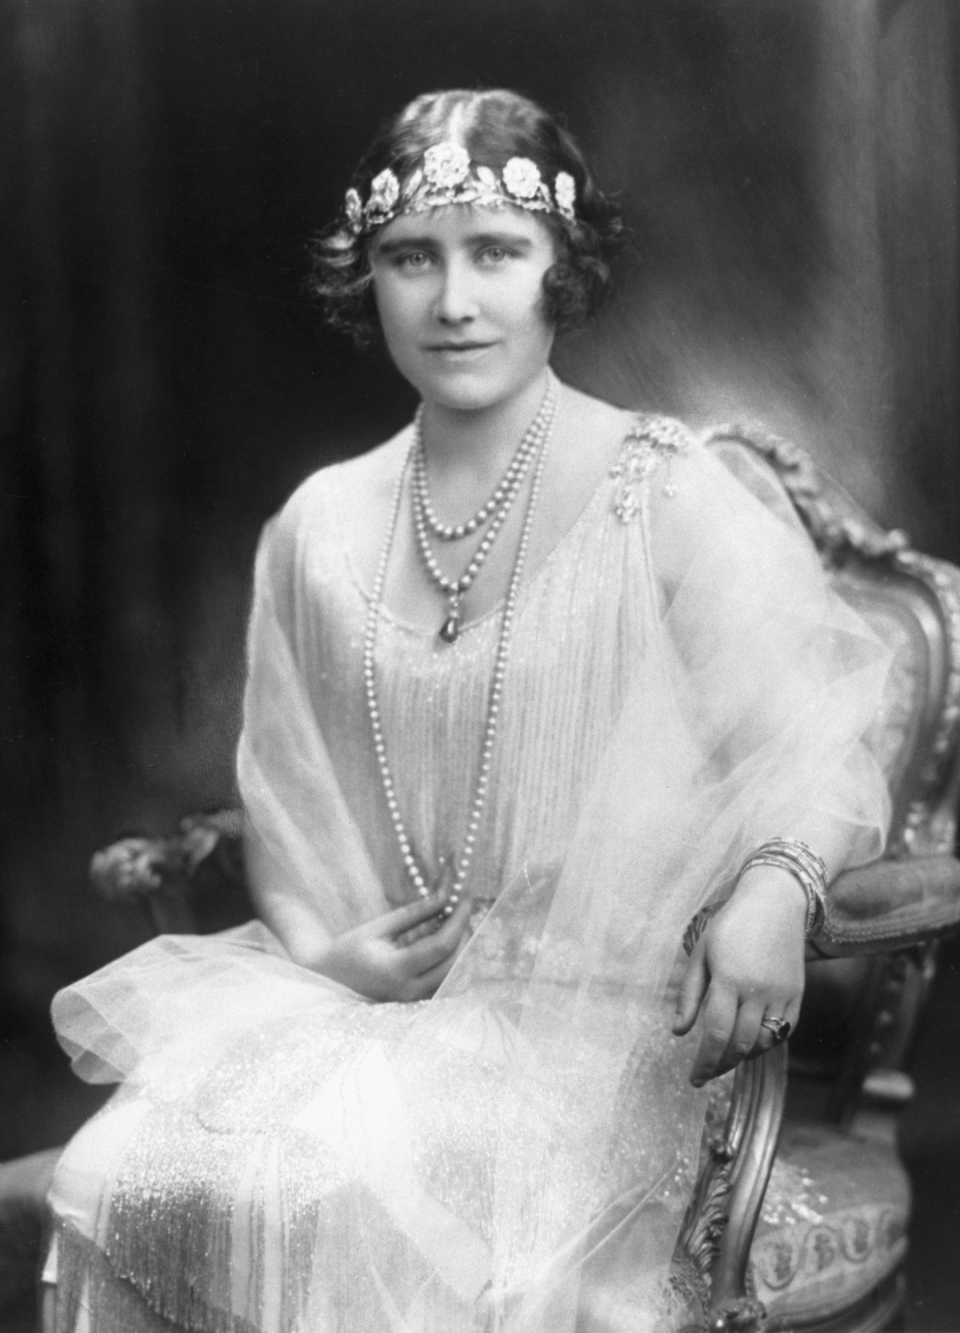 The Queen Mother favoured the Strathmore Rose Tiara